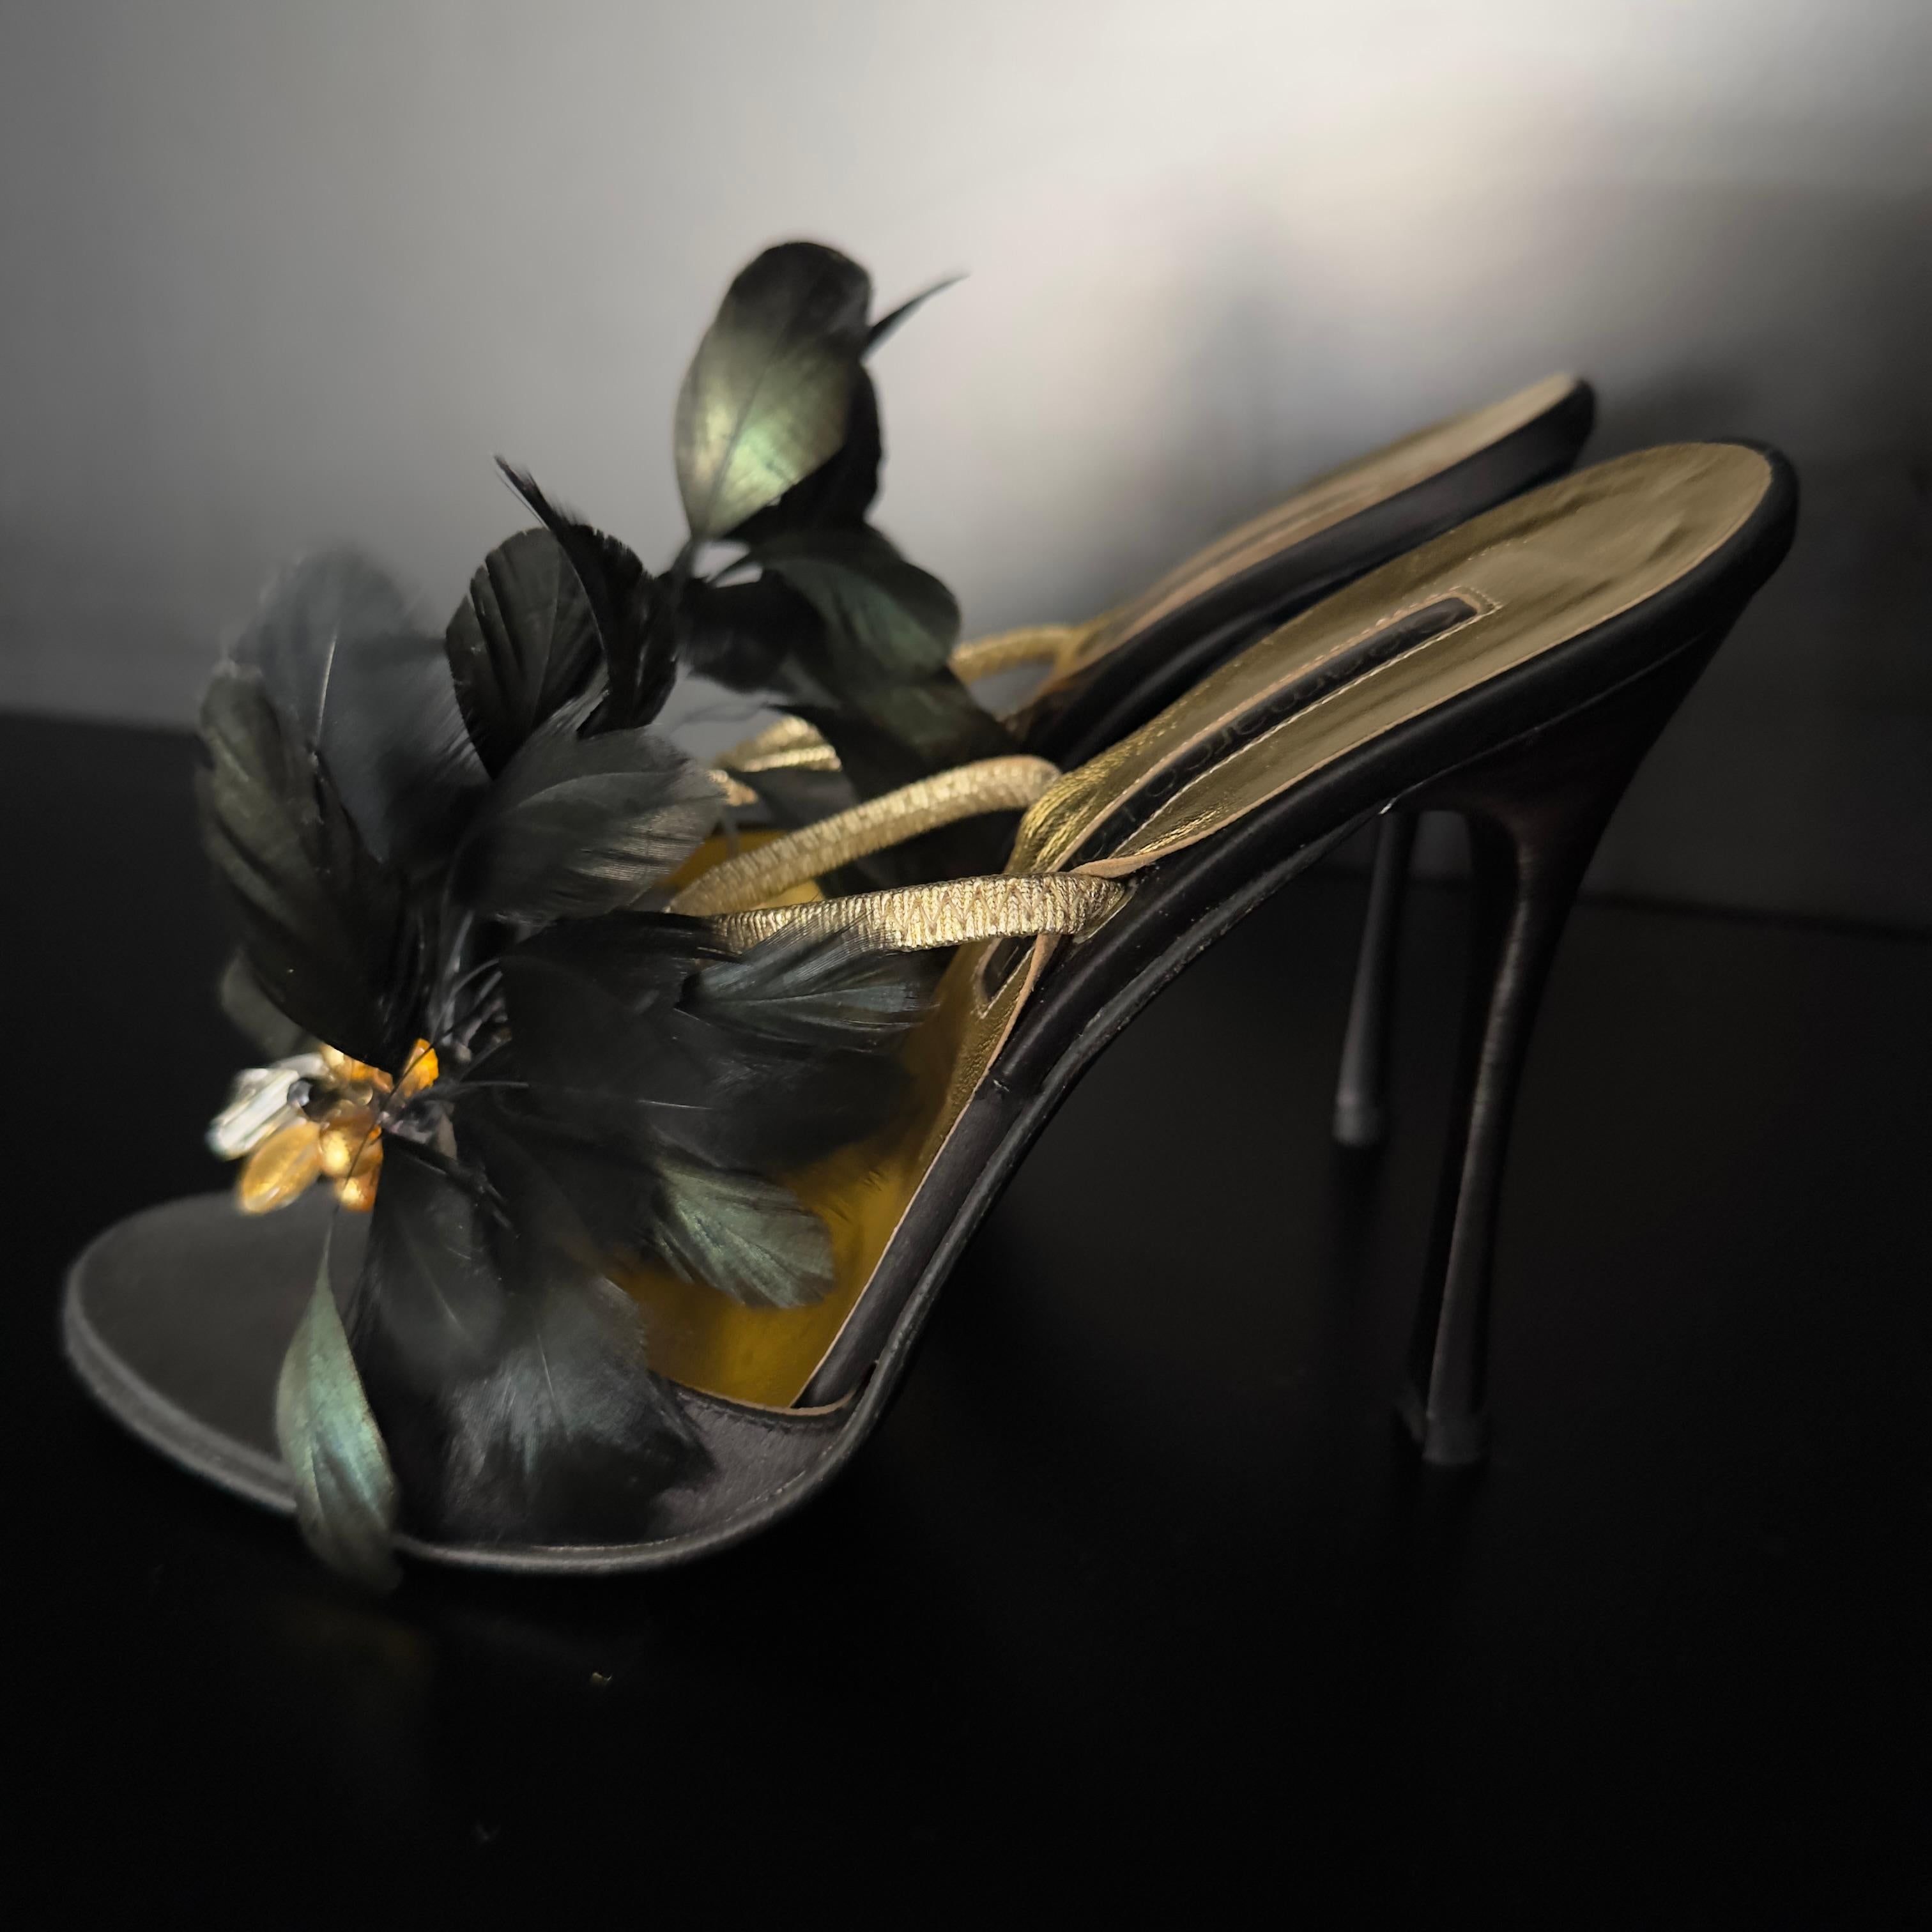 Gianmarco Lorenzi black satin sandal with gold instep strap.
Decorated with stones and feathers that set a chic and gritty tone. To be worn in all seasons, barefoot in summer or with socks in winter
Good general condition
Number 37
Heel 12cm sole